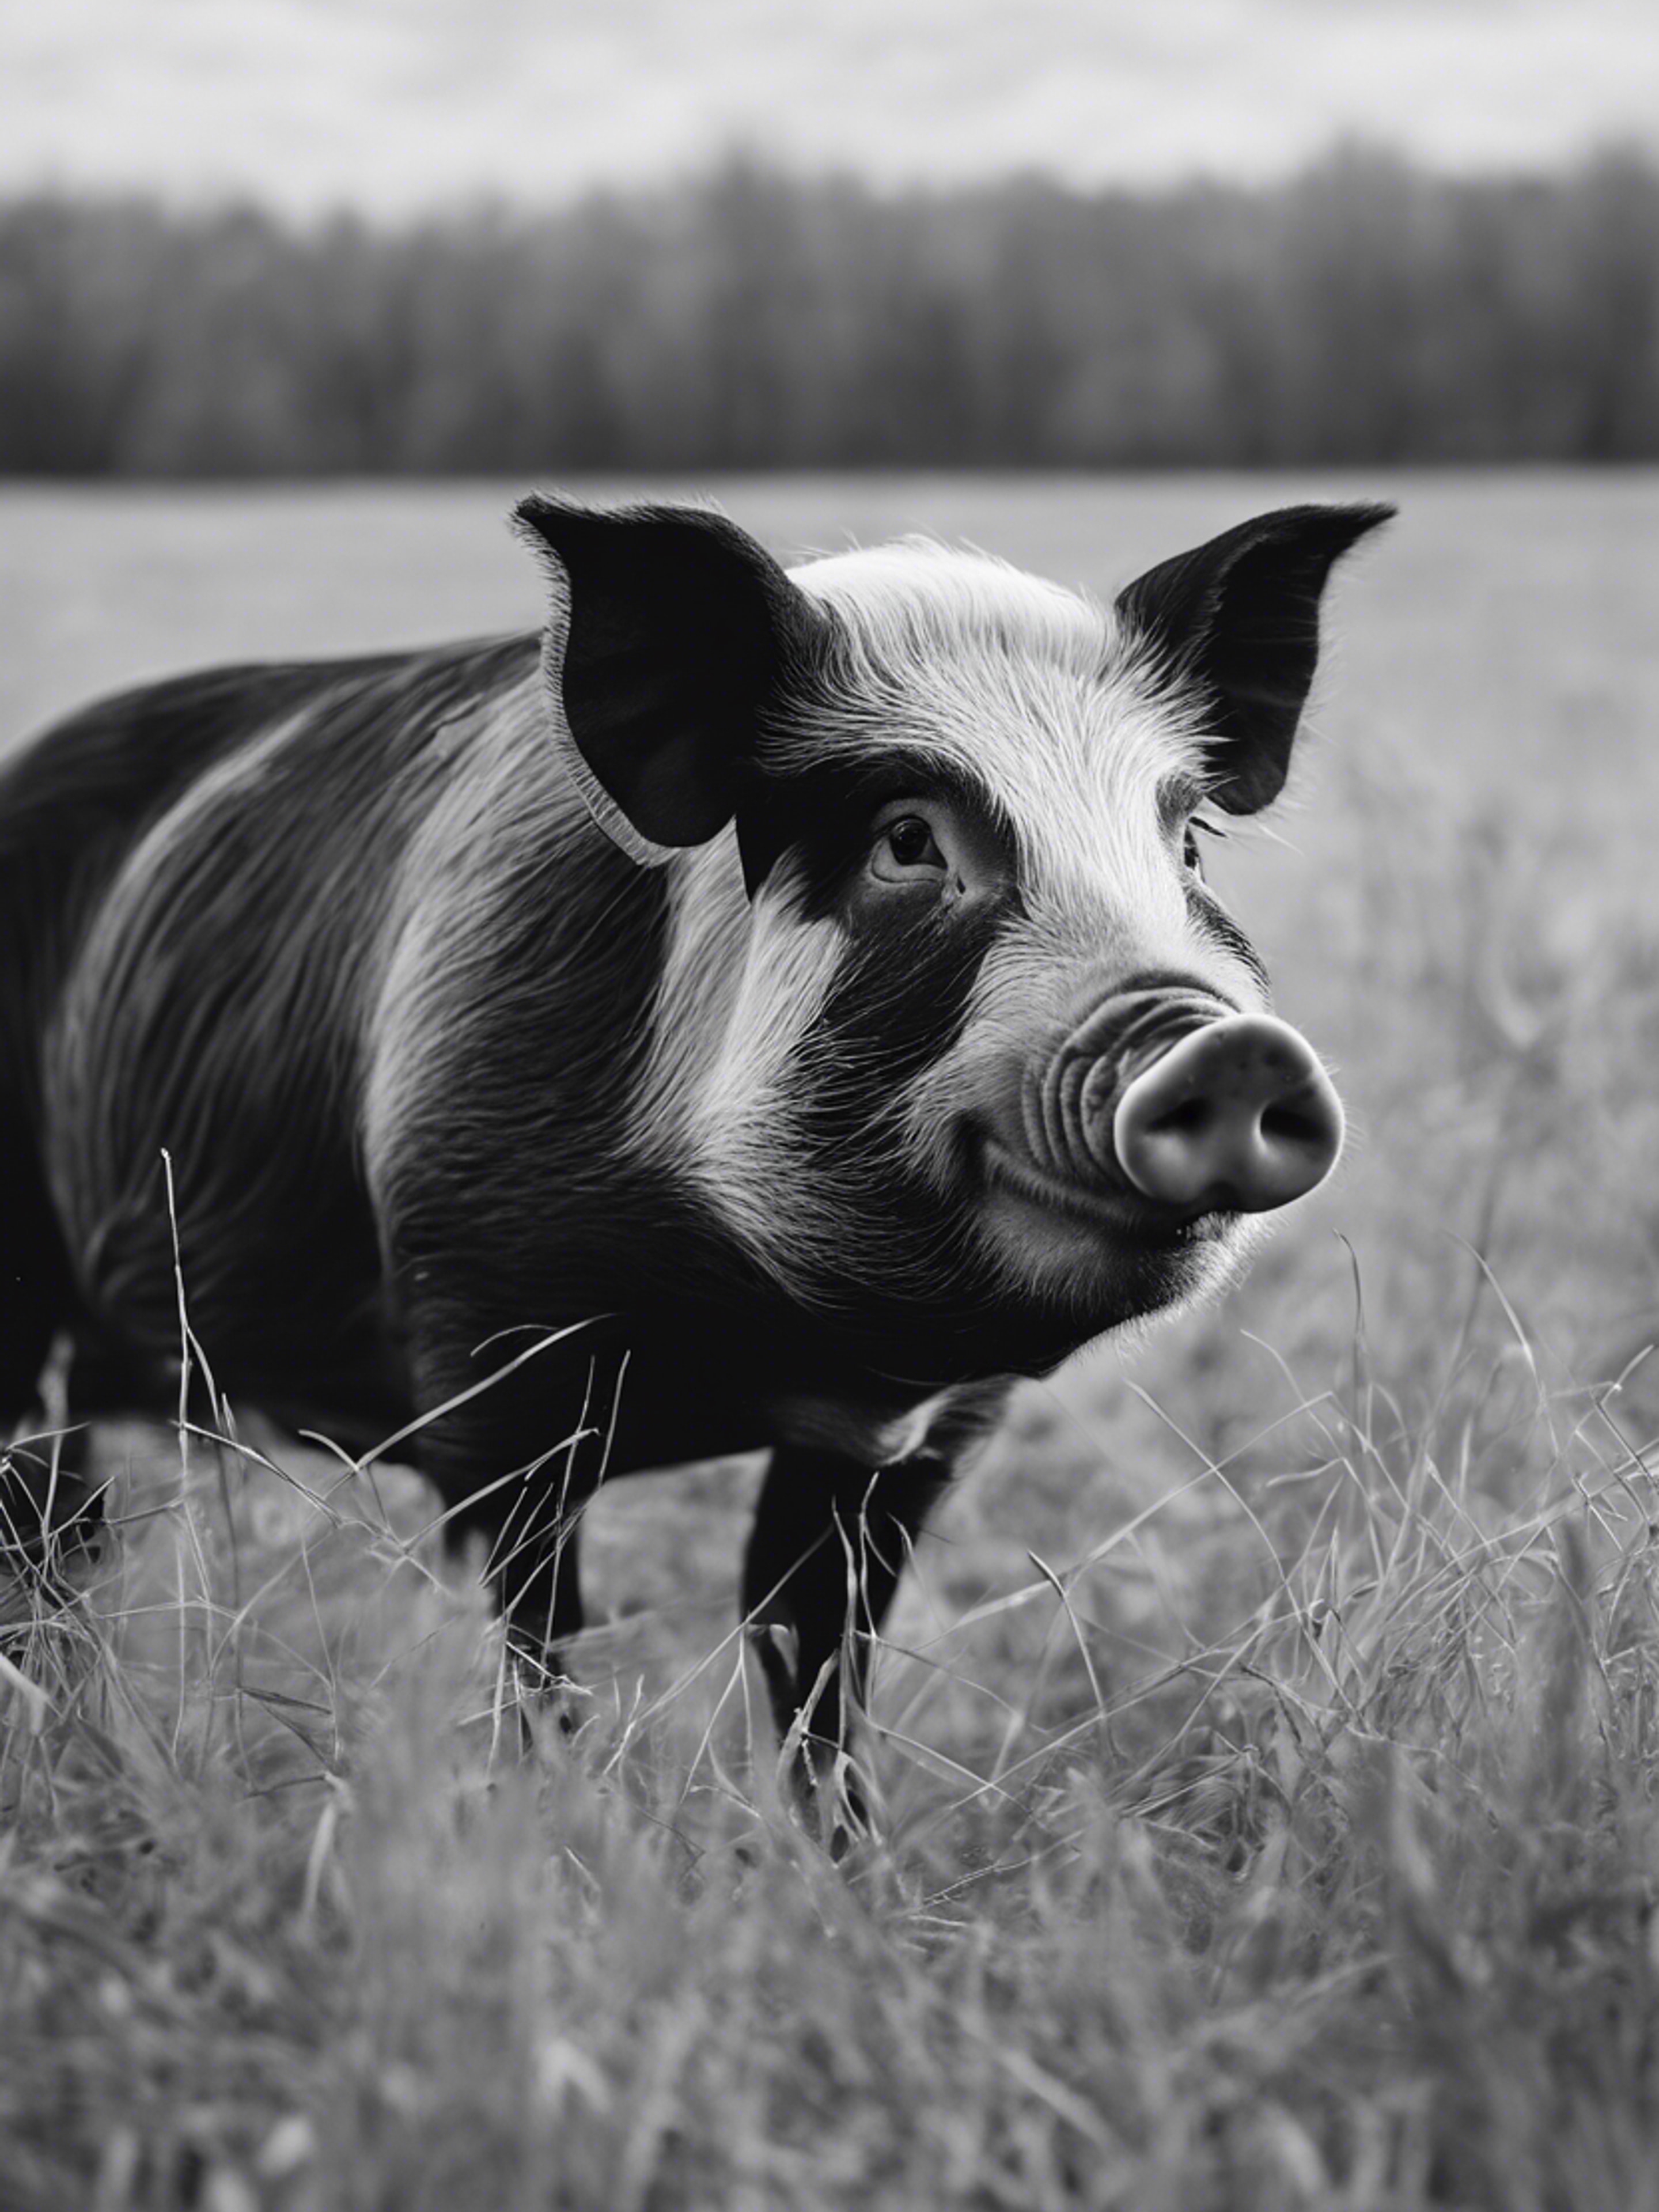 A black and white pig with clean fur, captured in a country meadow during tranquility of winter. Fondo de pantalla[700eb497dc0e43a8b530]